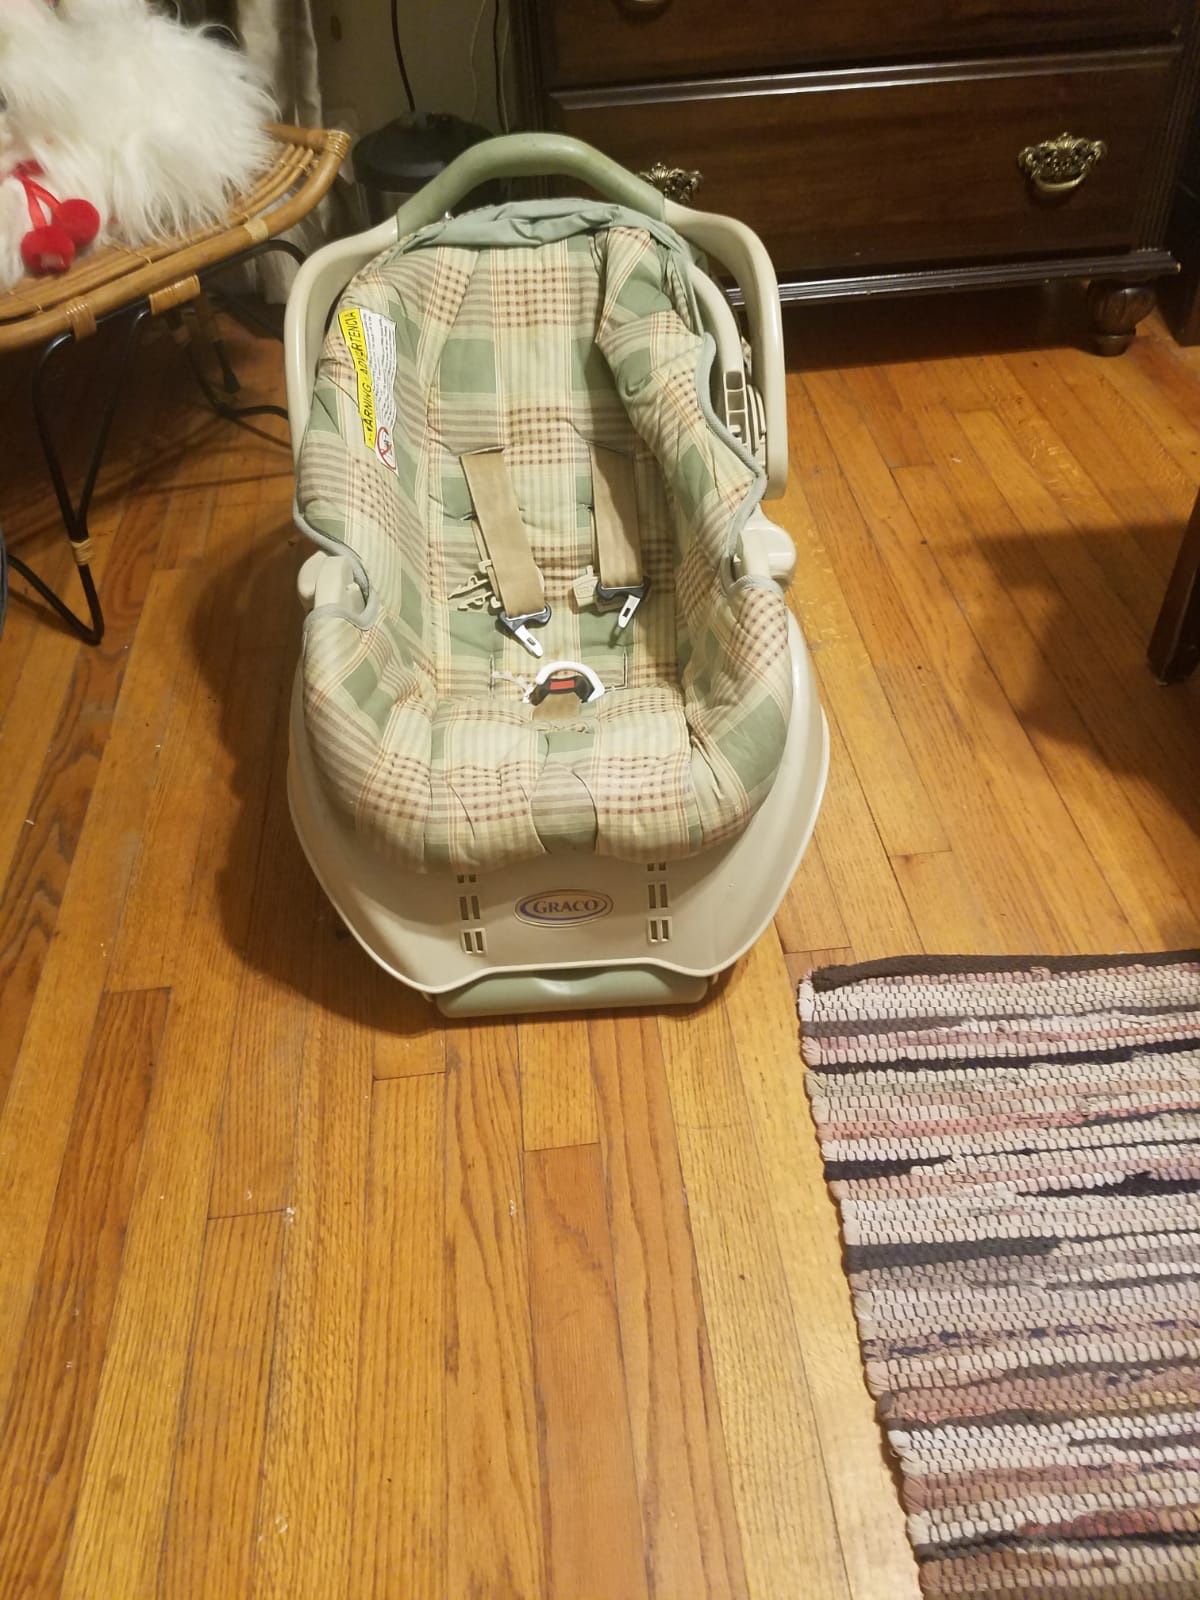 Graco Baby carseat Carrier and base